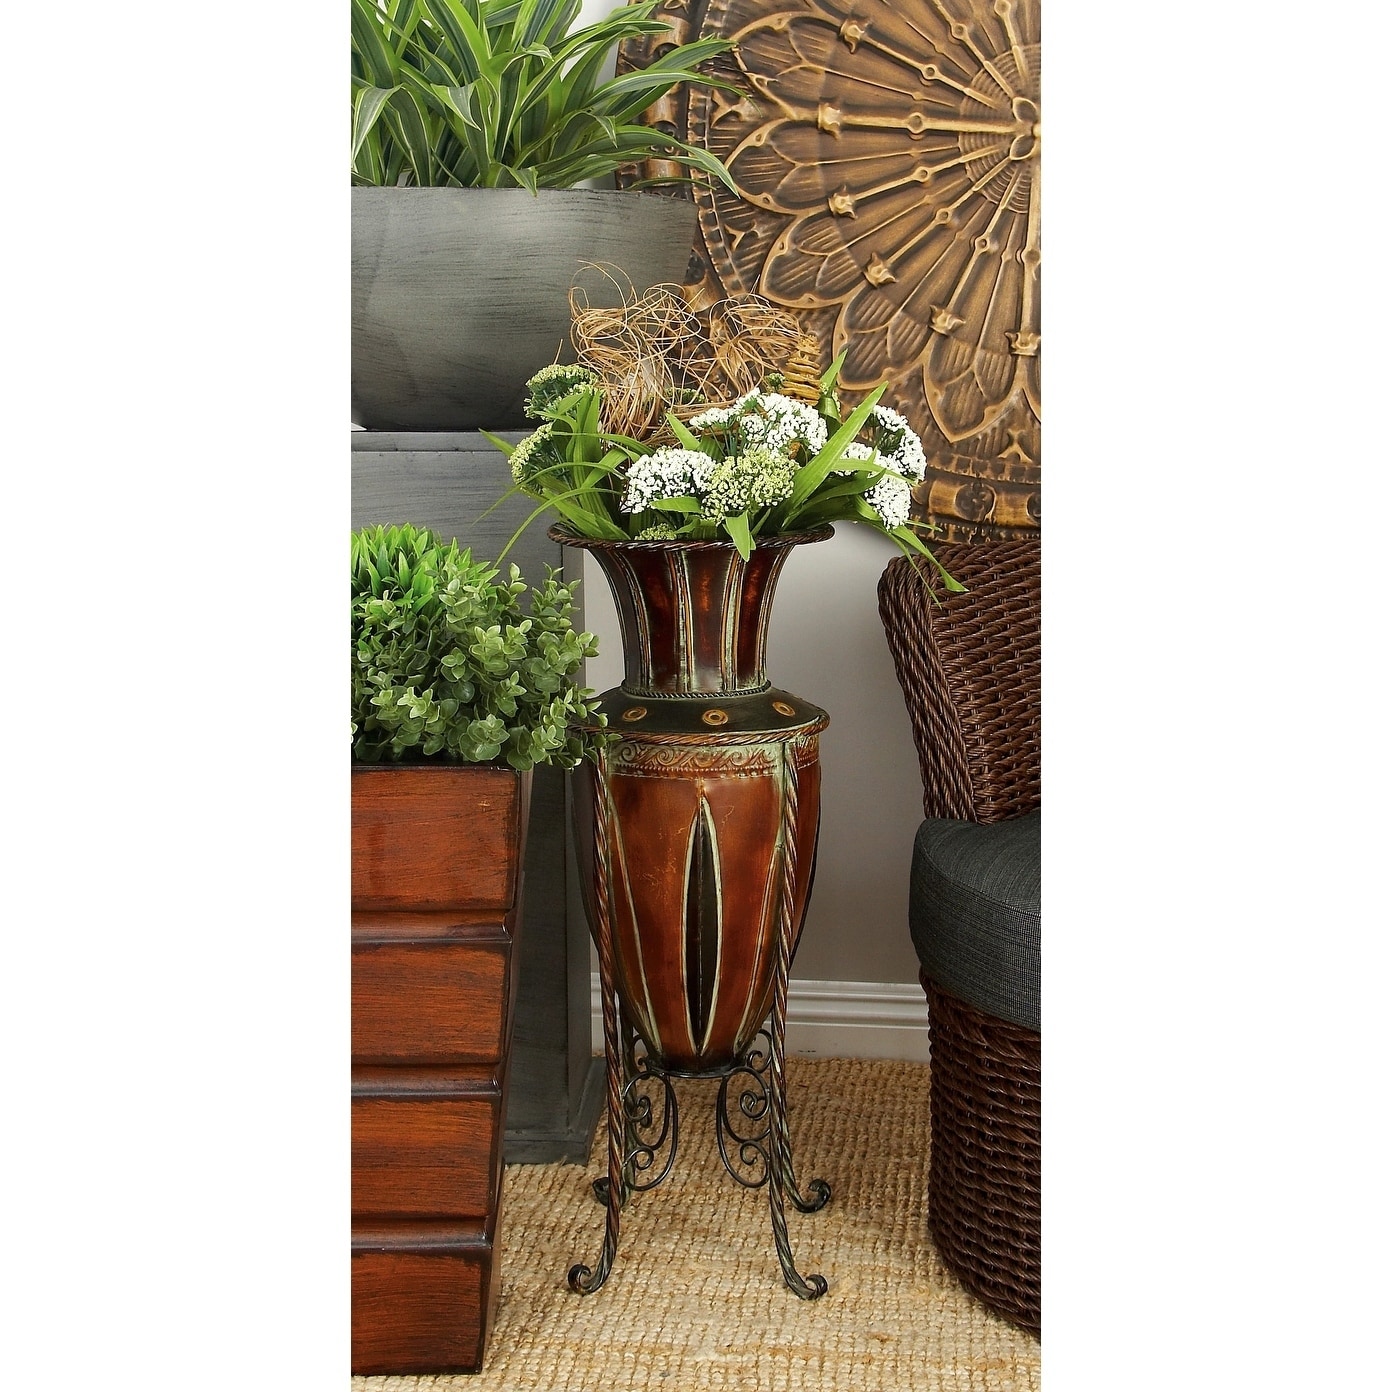 Shop The Curated Nomad Belli Tuscany Style Metal Vase On Sale